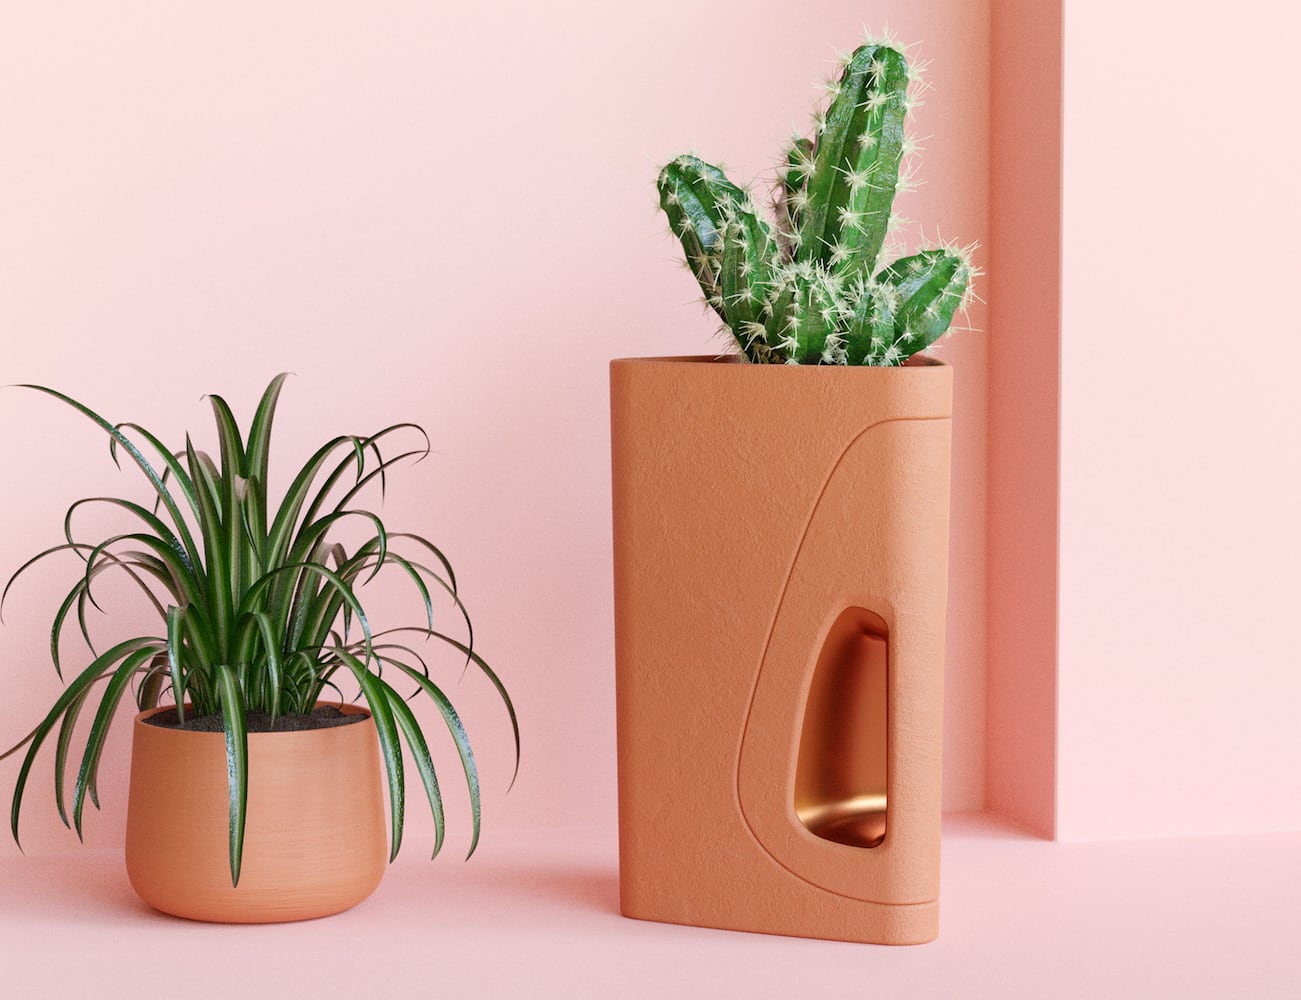 Mesa Handheld Vacuum Cleaner is also a potted plant